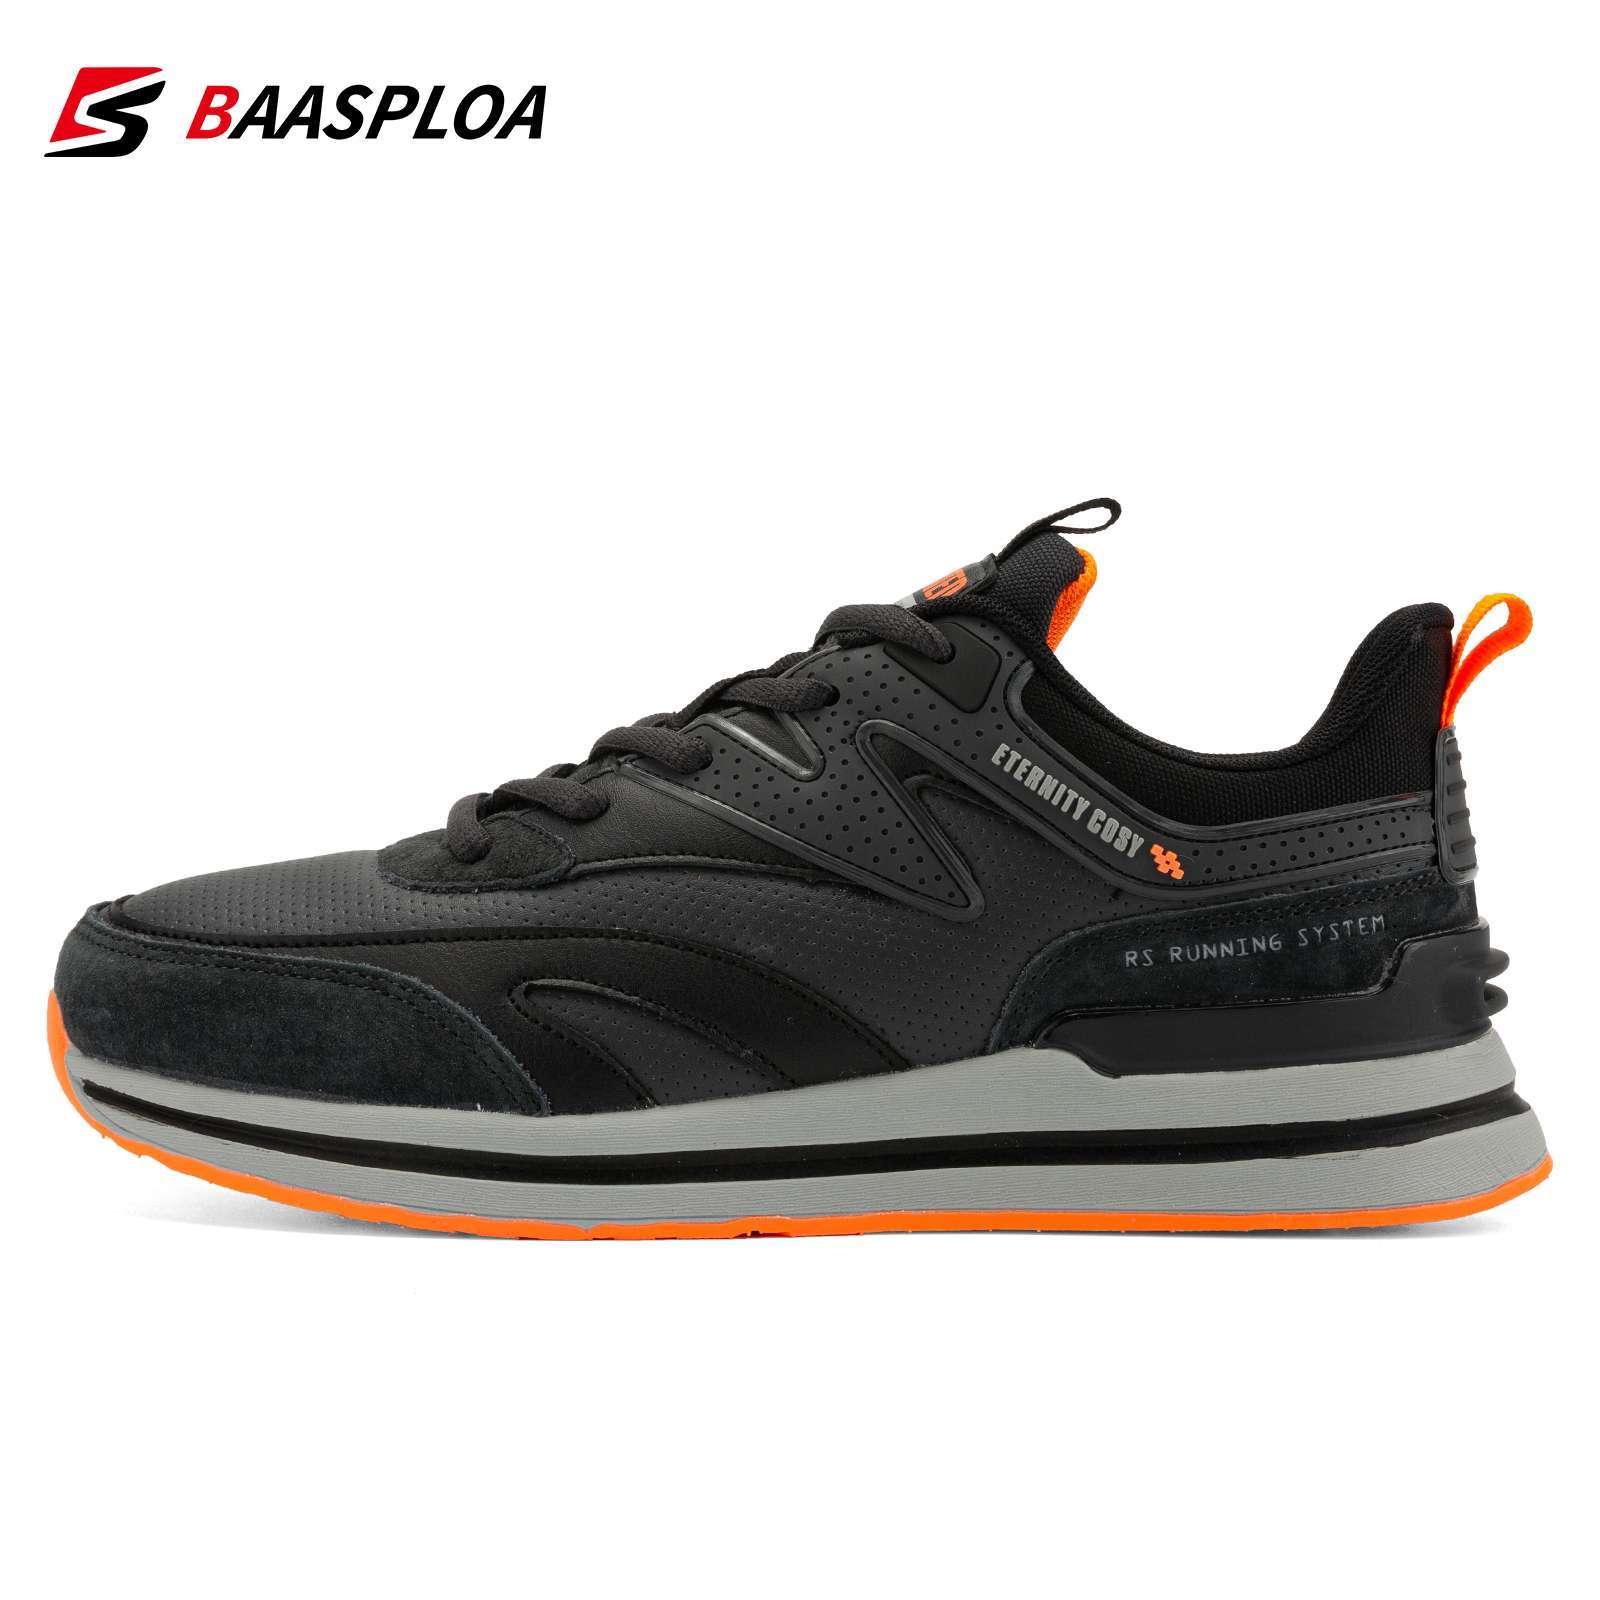 Baasploa New Men Leather Sneakers Lightweight Non slip Walking Shoes Fashion Male Casual Comfortable Lace Up 1